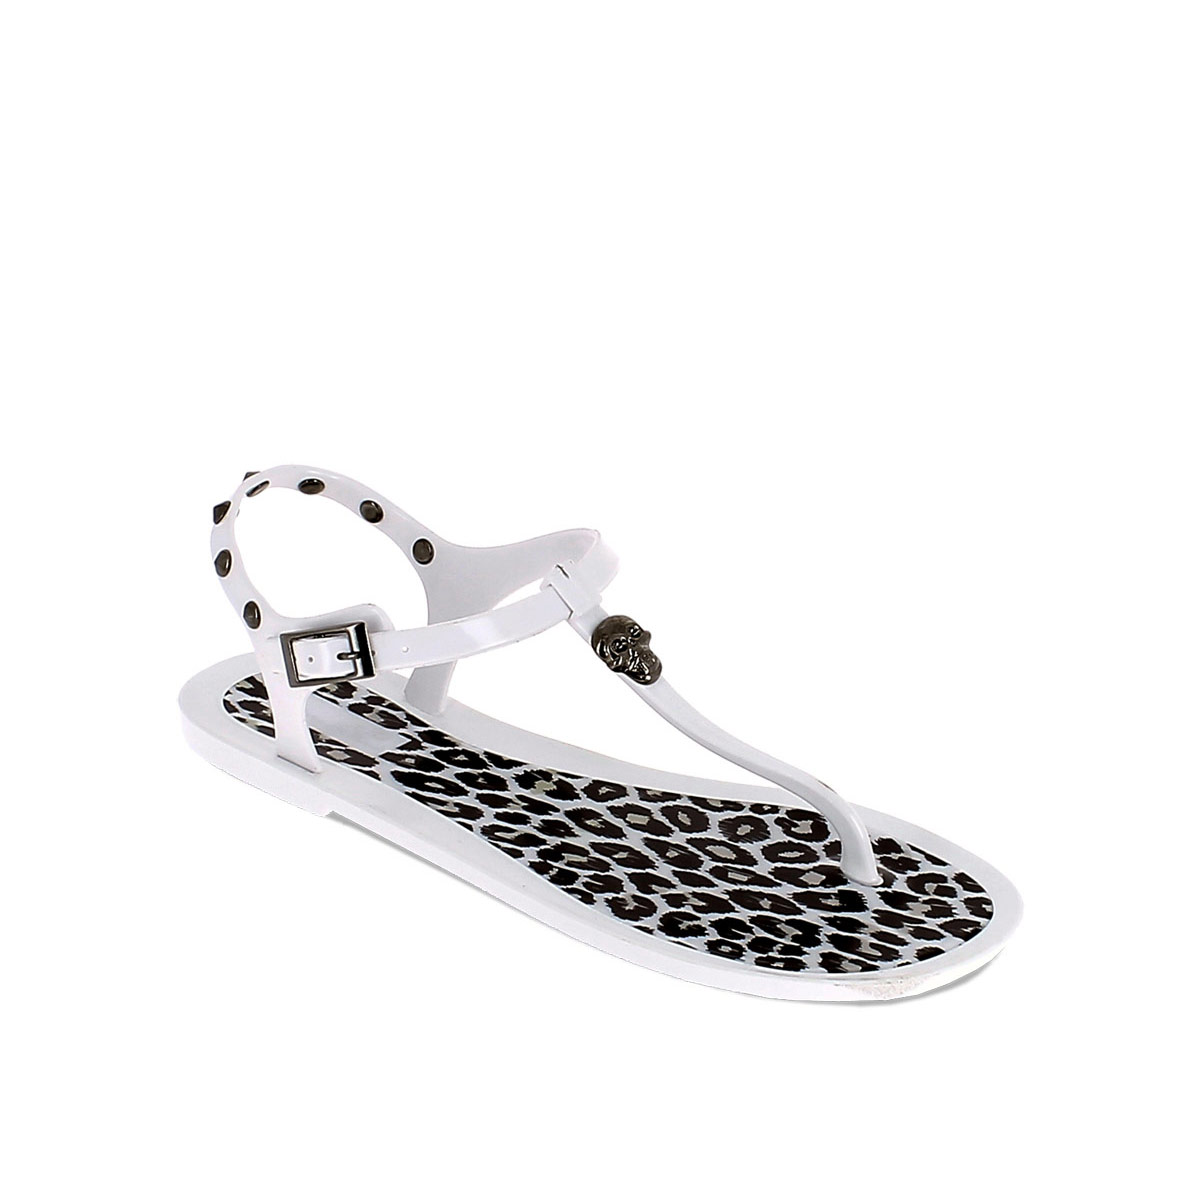 PVC THONG SANDAL WITH LEOPARD PATTERN INSOLE